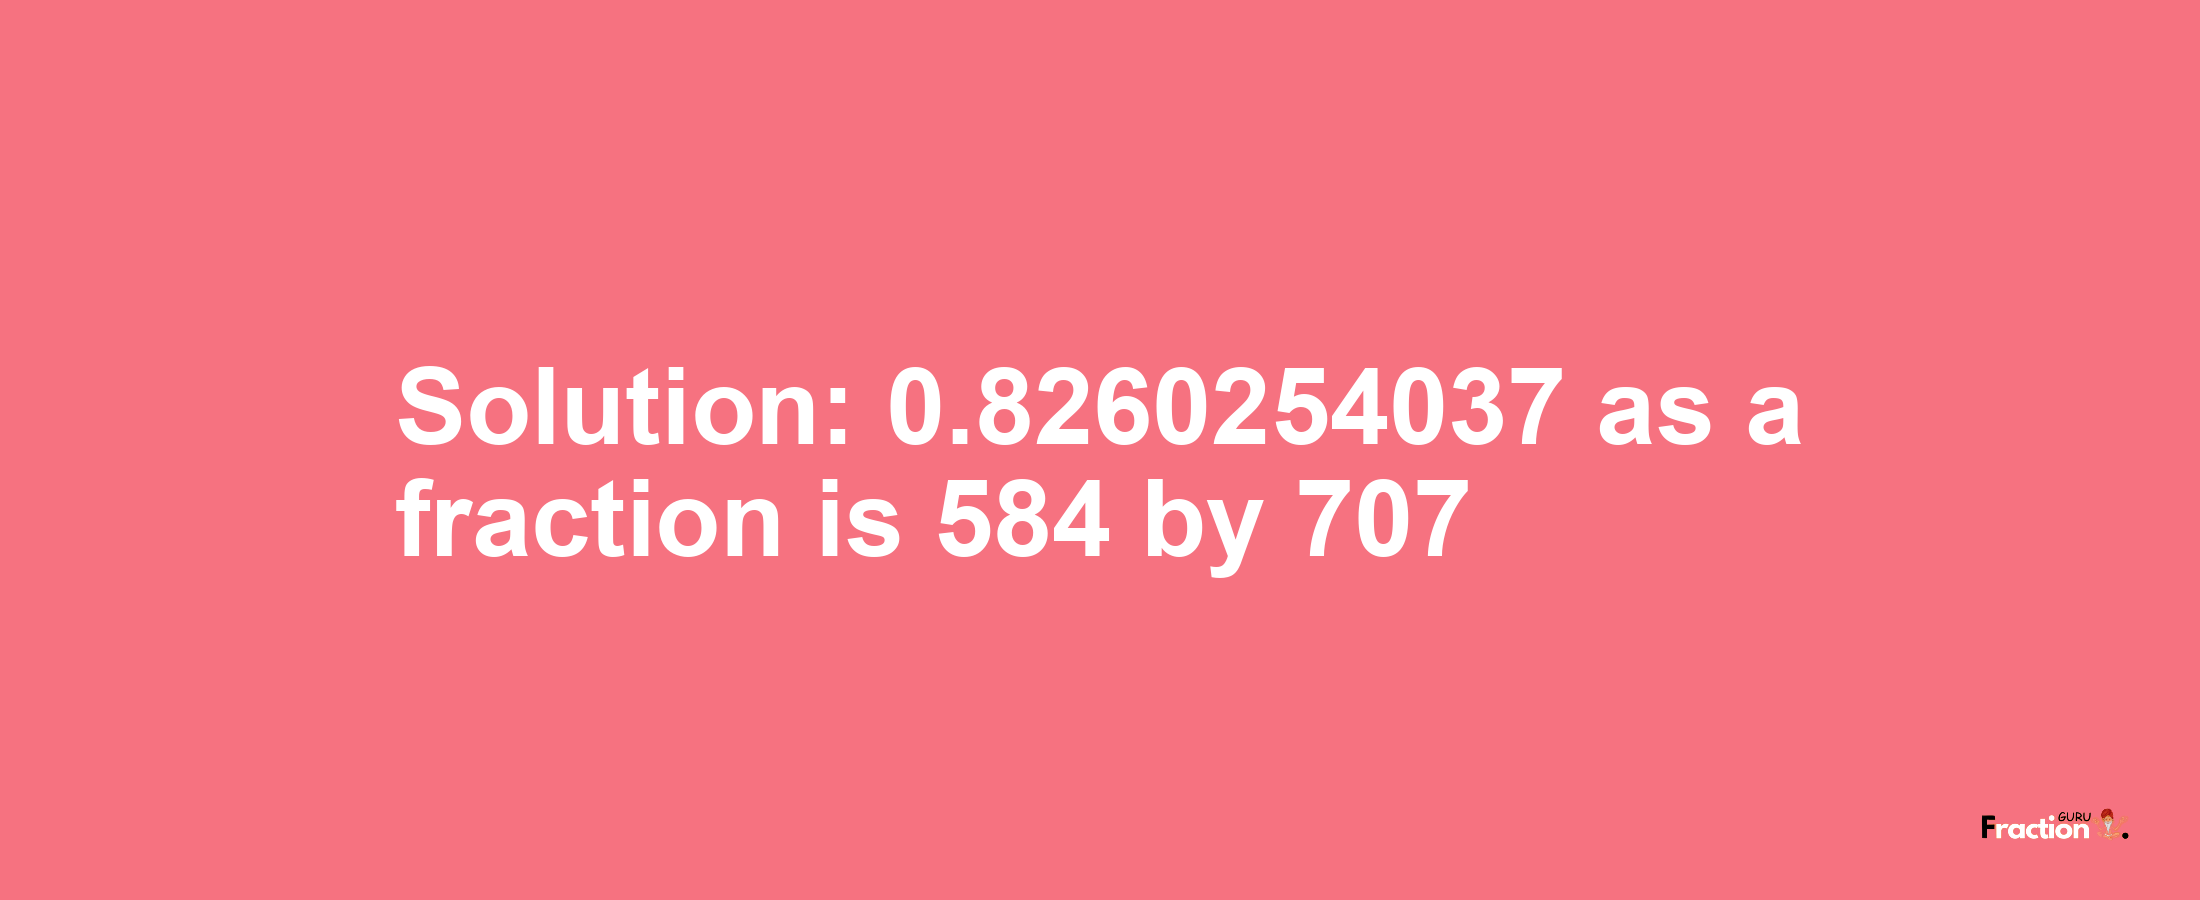 Solution:0.8260254037 as a fraction is 584/707